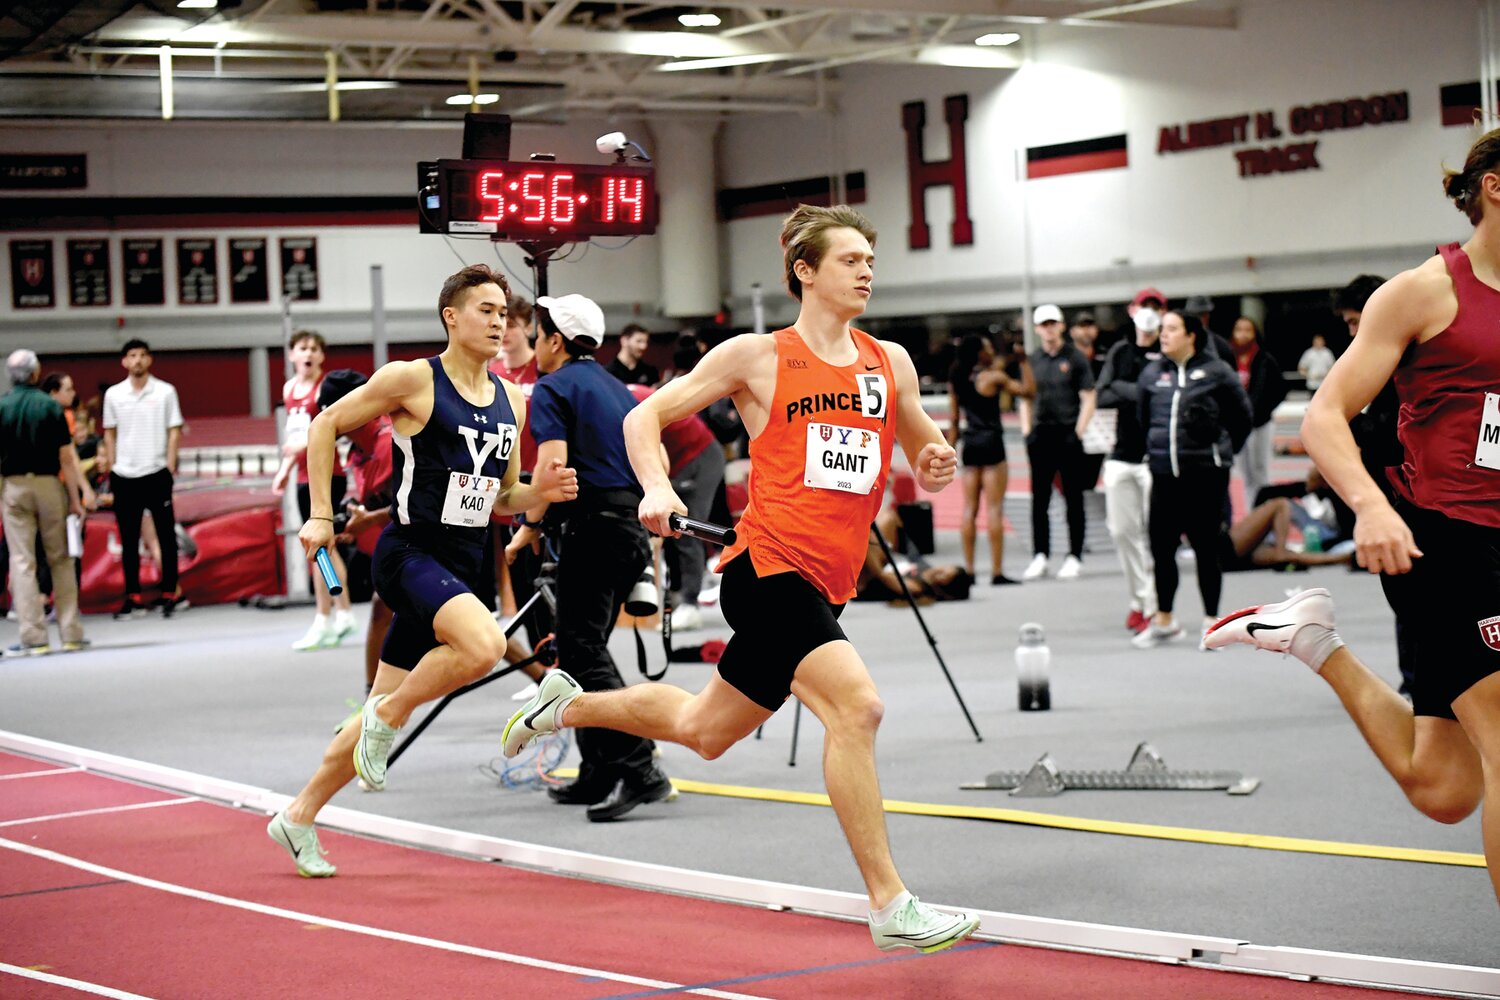 Joey Gant and his teammates helped Princeton secure its eighth straight Ivy League indoor championship this past February by finishing second in the 4x400 relay. Individually, Gant finished fourth in the 200 meter.